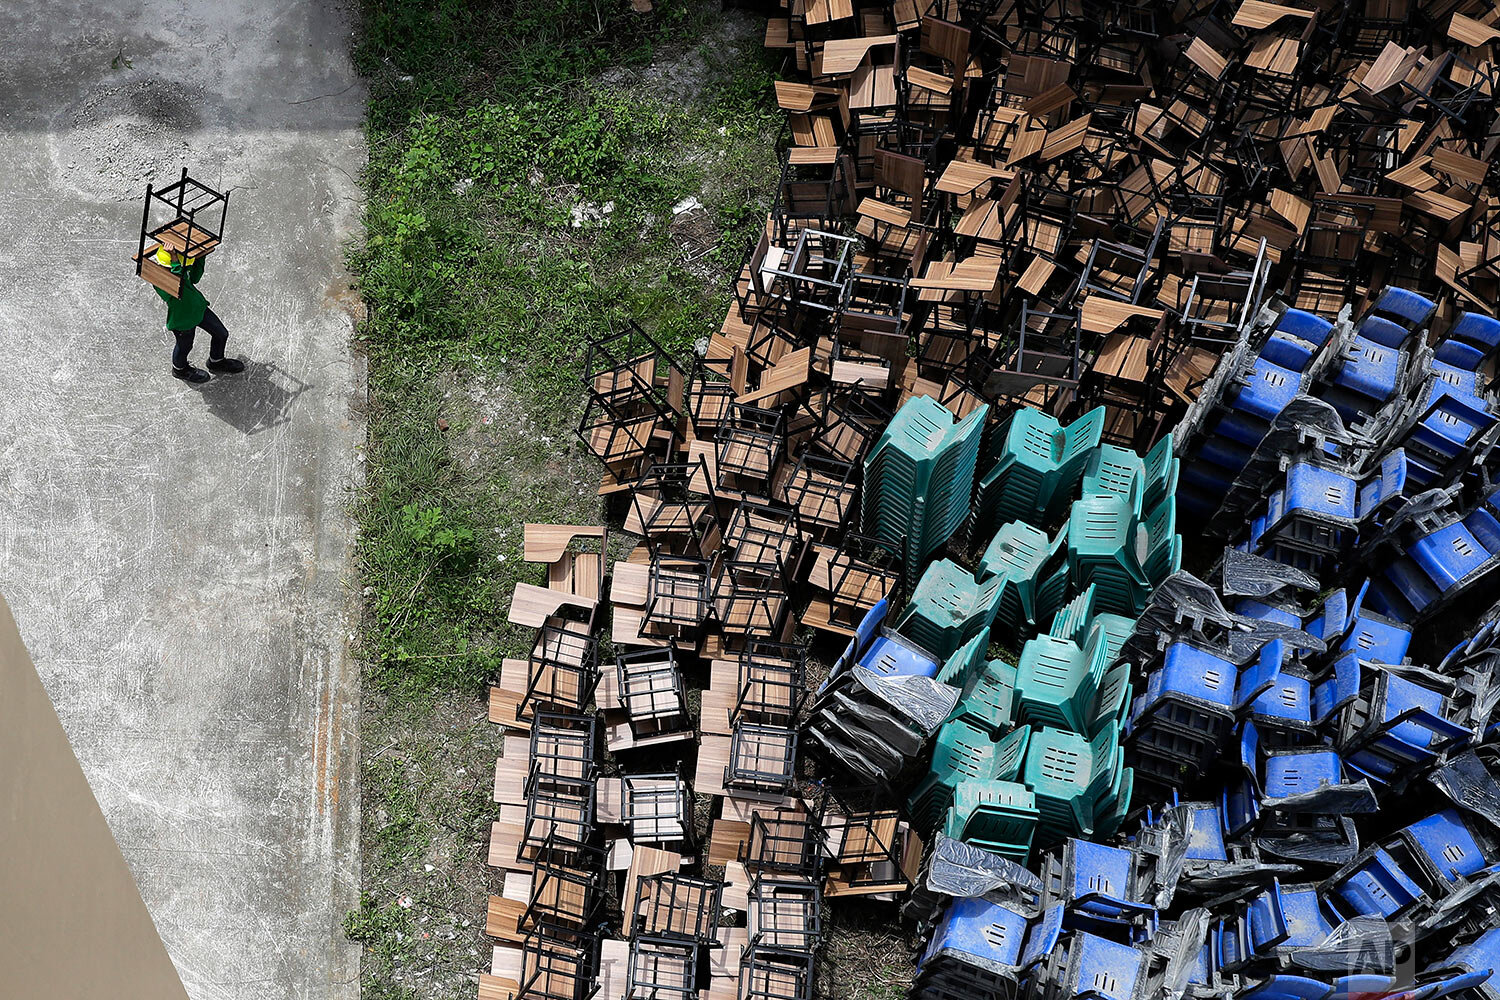  A worker arranges chairs as they temporarily convert a public school to a COVID-19 quarantine facility in Quezon city, Philippines on Tuesday, Sept. 1, 2020, as the government further eased lockdown restrictions despite the country having the most c